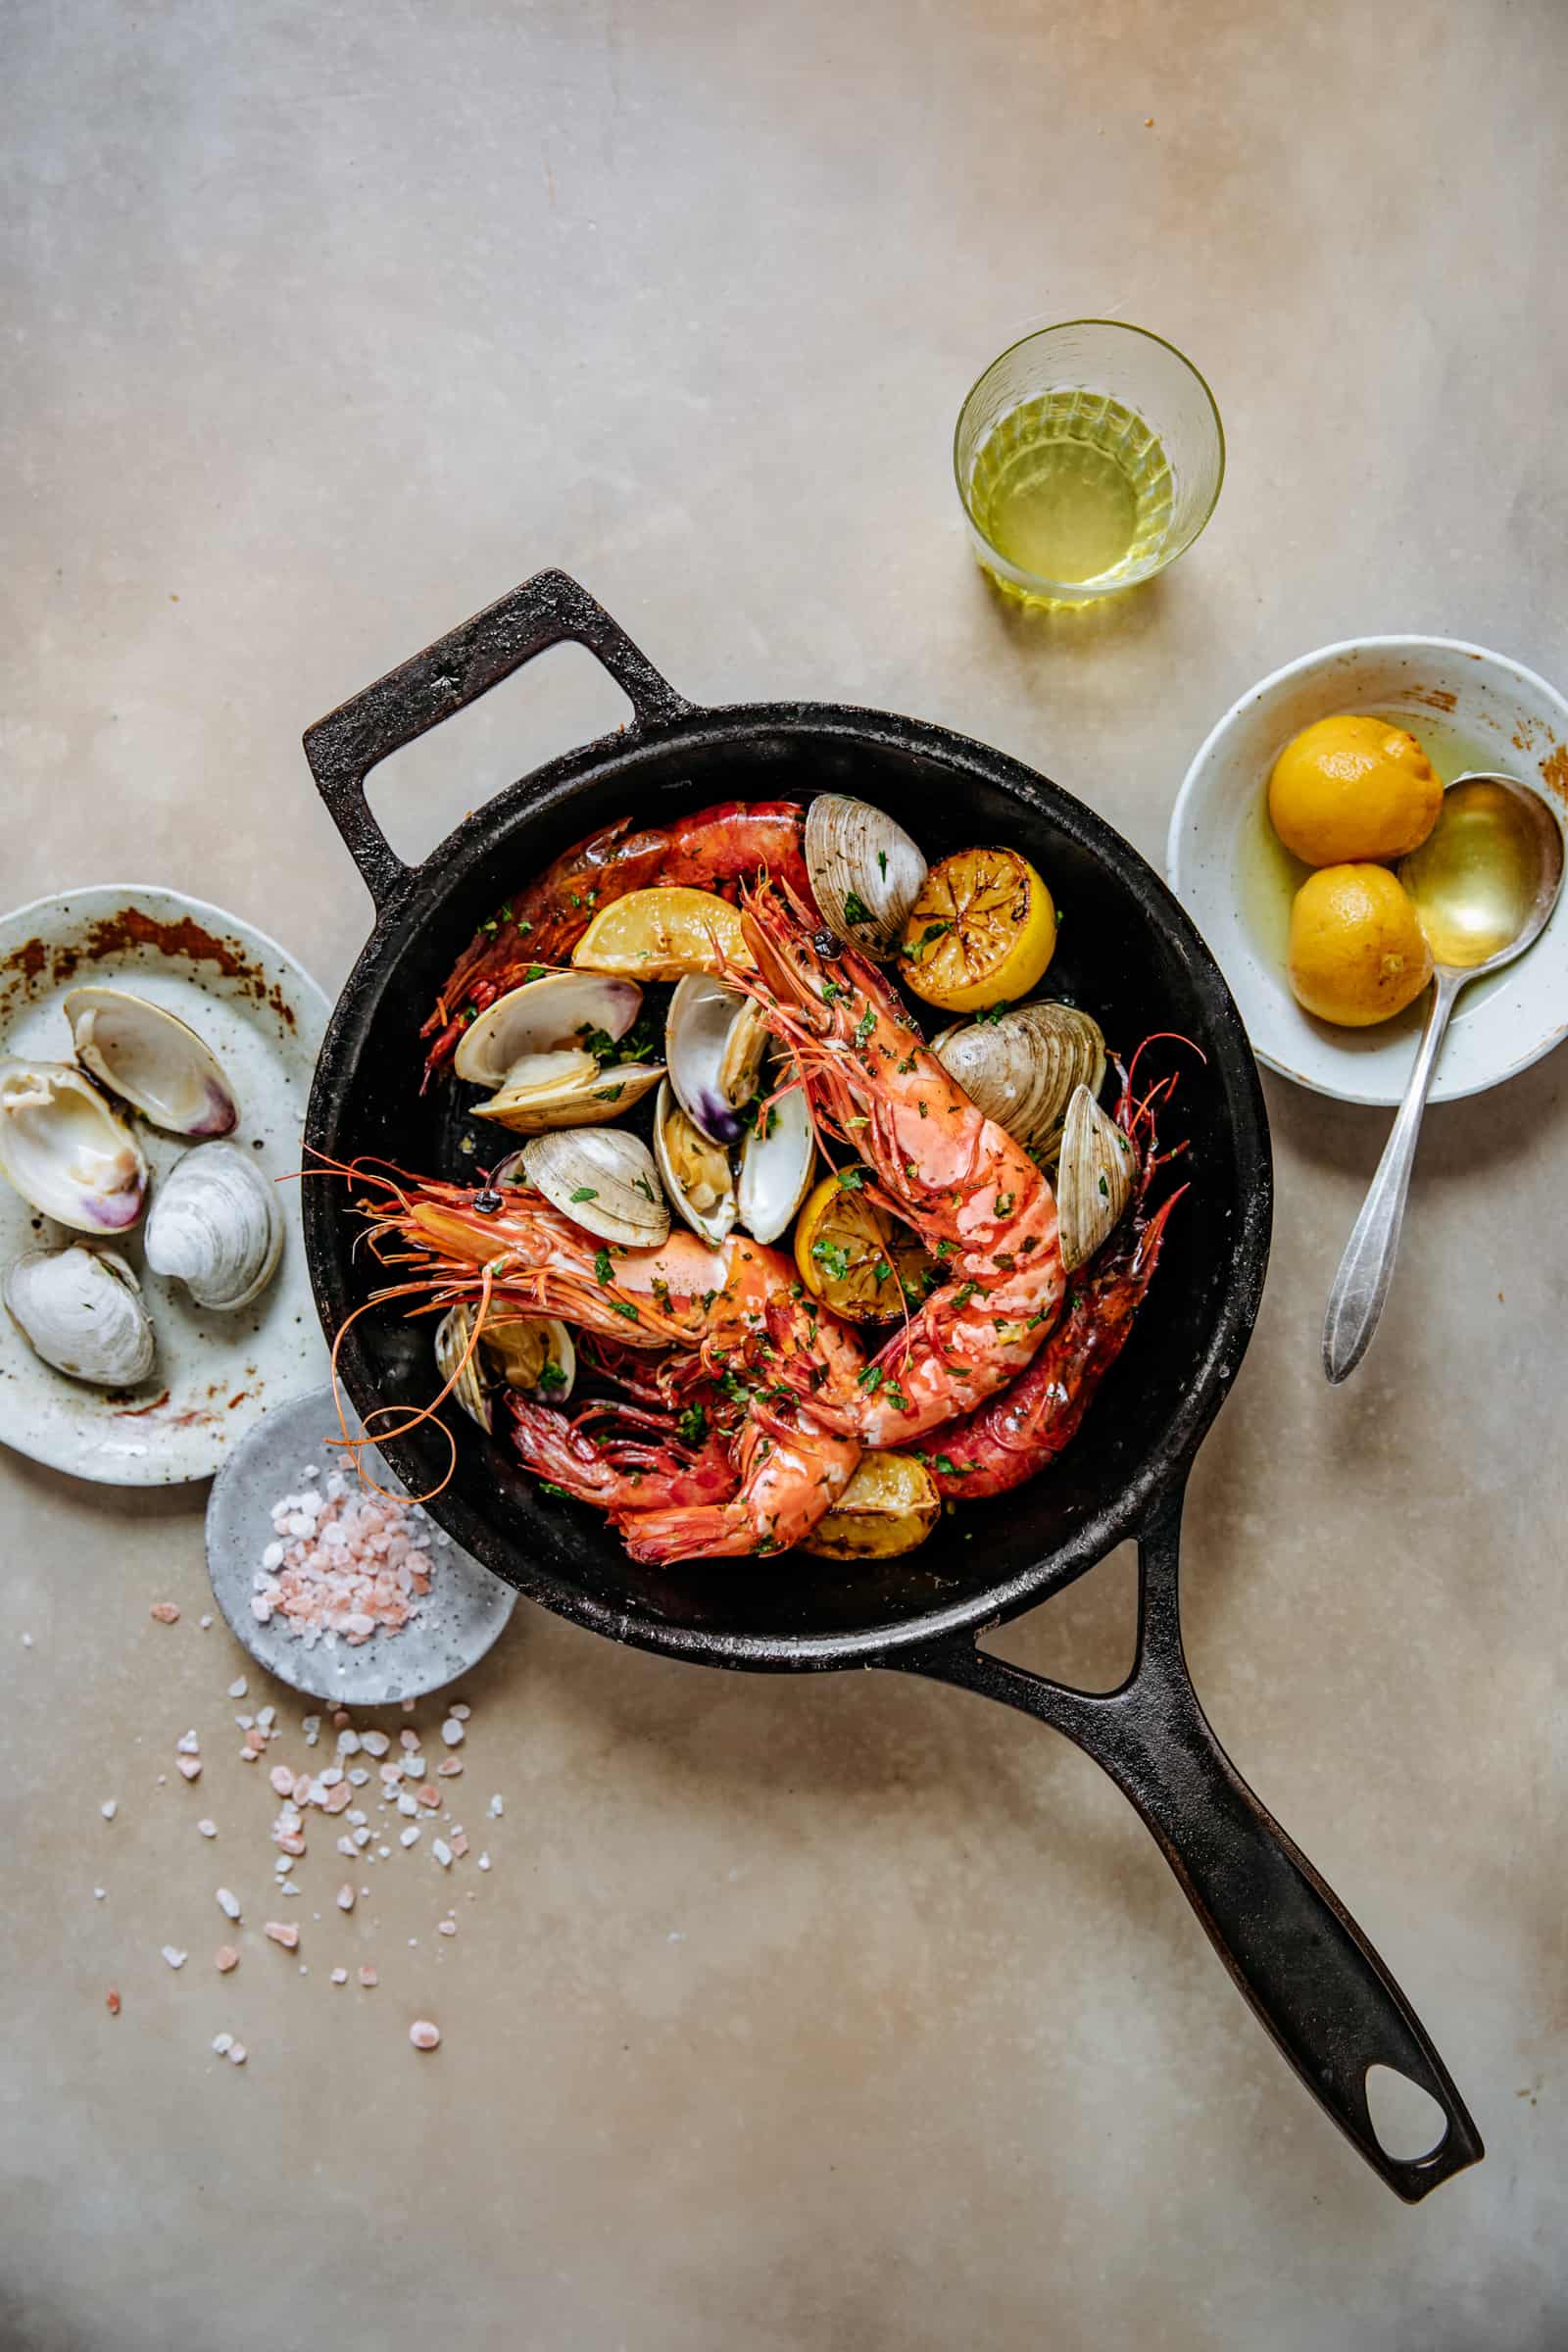 https://www.add1tbsp.com/wp-content/uploads/2018/07/20180726-Roasted-Prawns-with-Clams-and-Gremolata-2.jpg